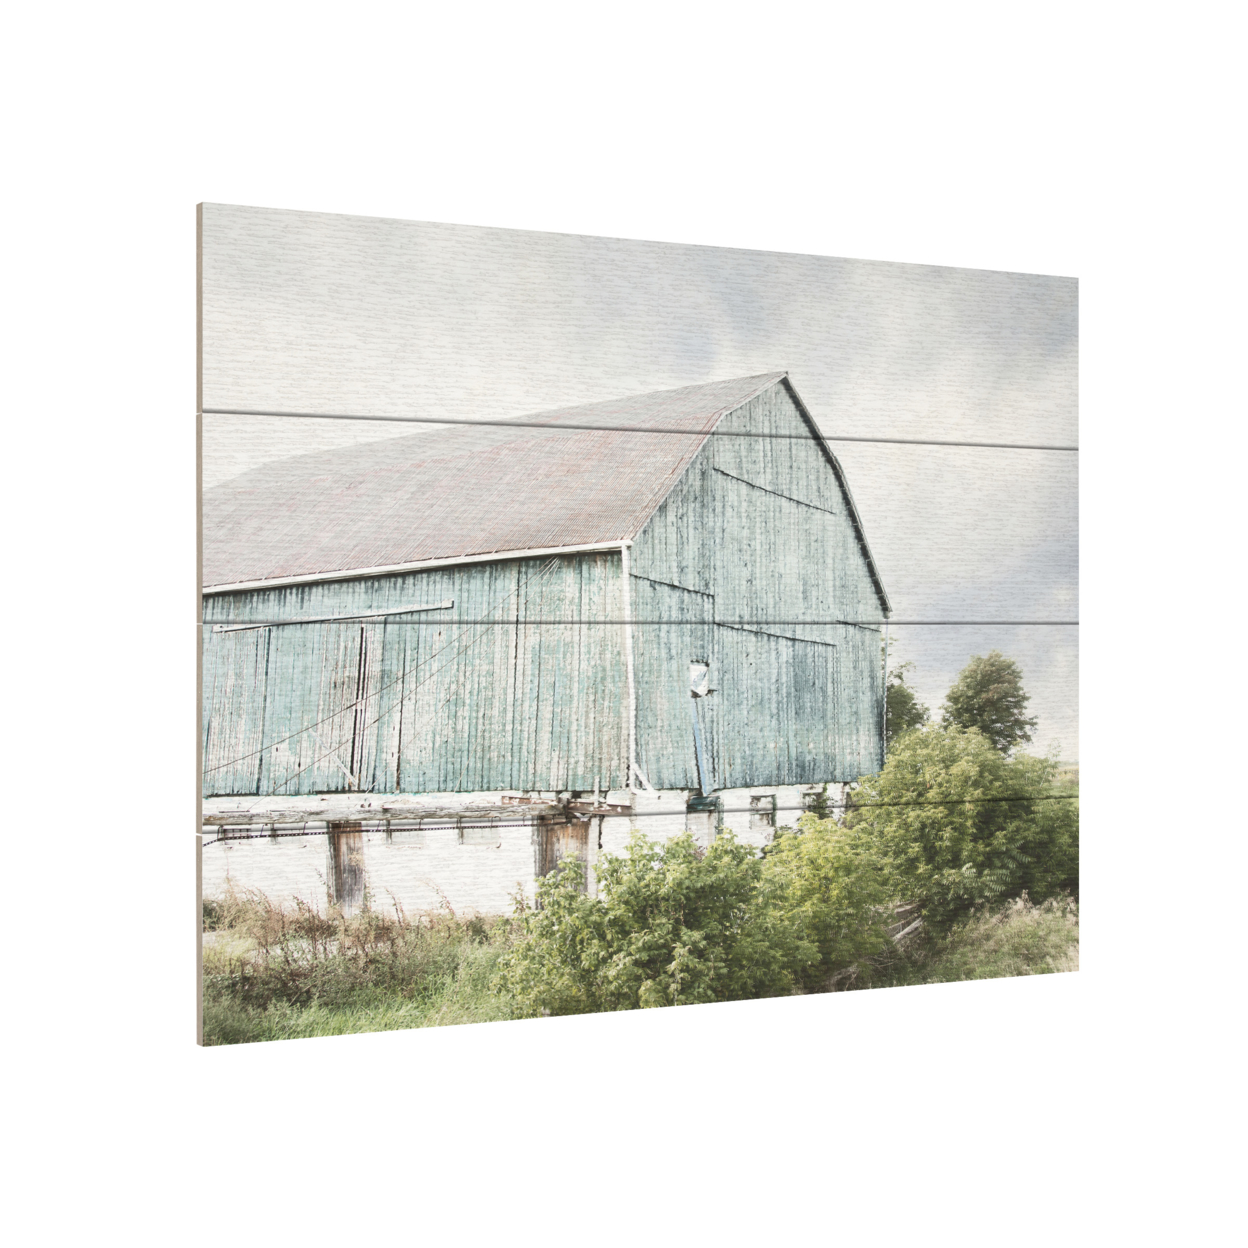 Wall Art 12 X 16 Inches Titled Late Summer Barn I Crop Ready To Hang Printed On Wooden Planks